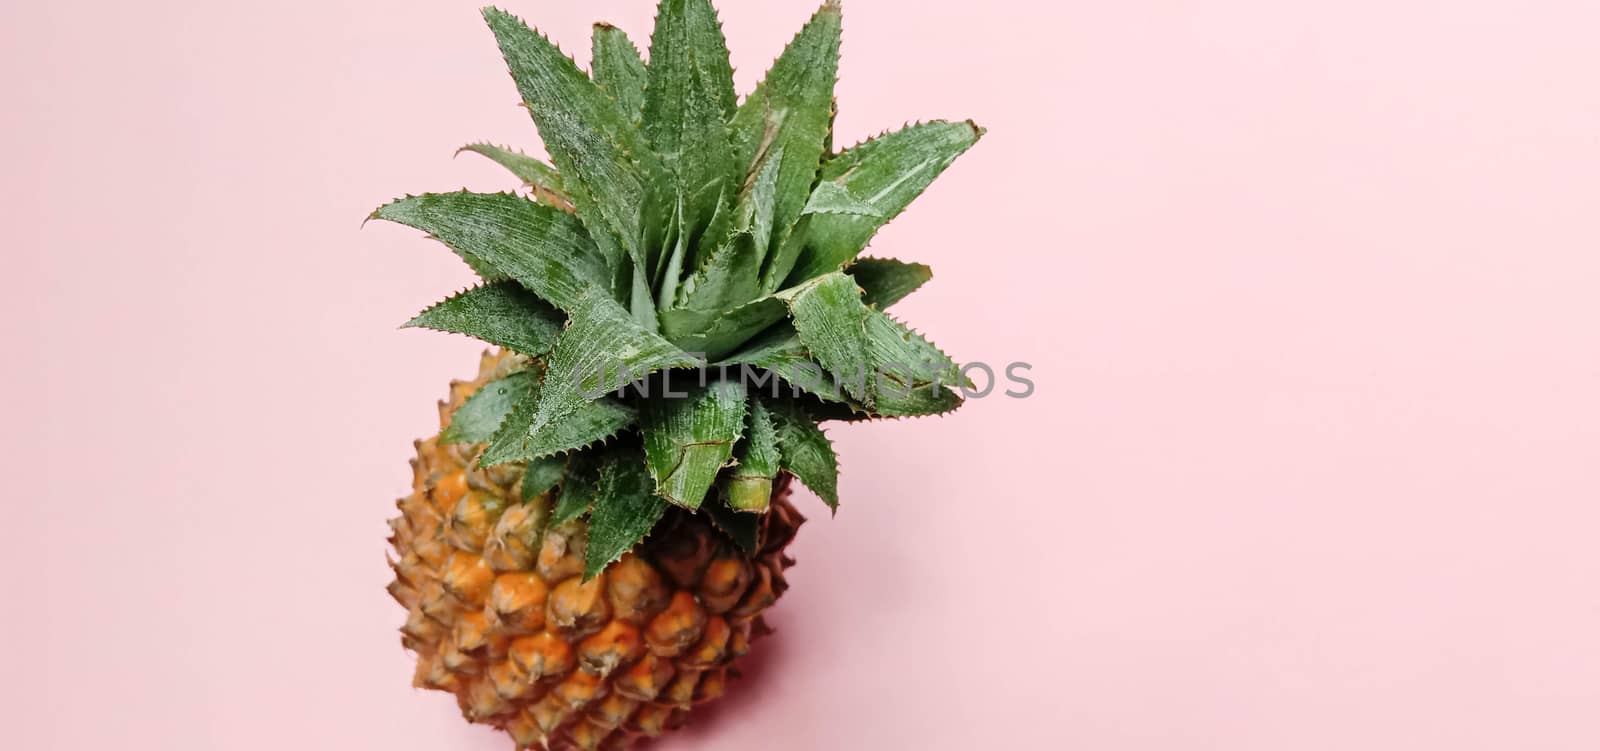 tasty and healthy orange colored pineapple closeup on pink colored background